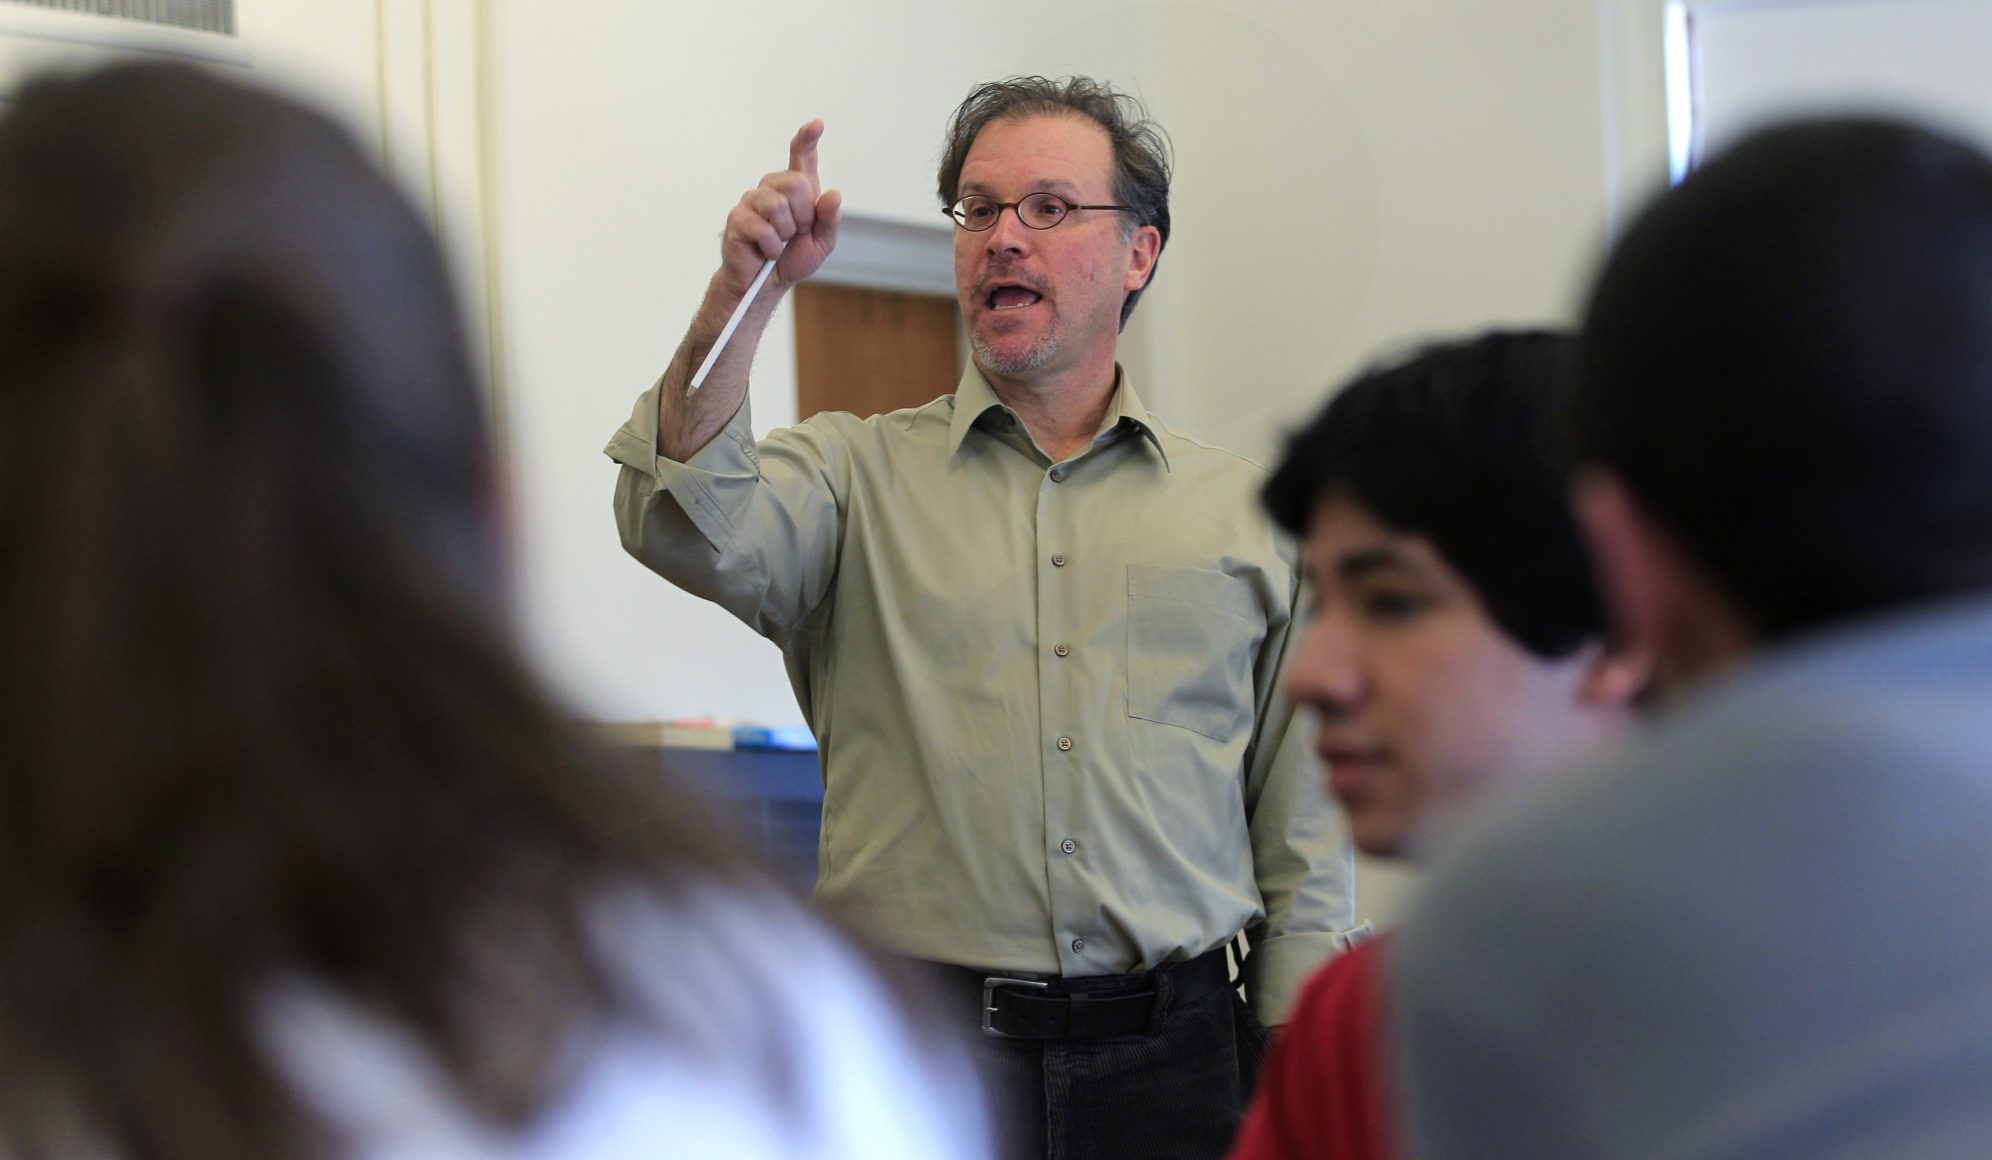 A college professor giving a lecture in a classroom